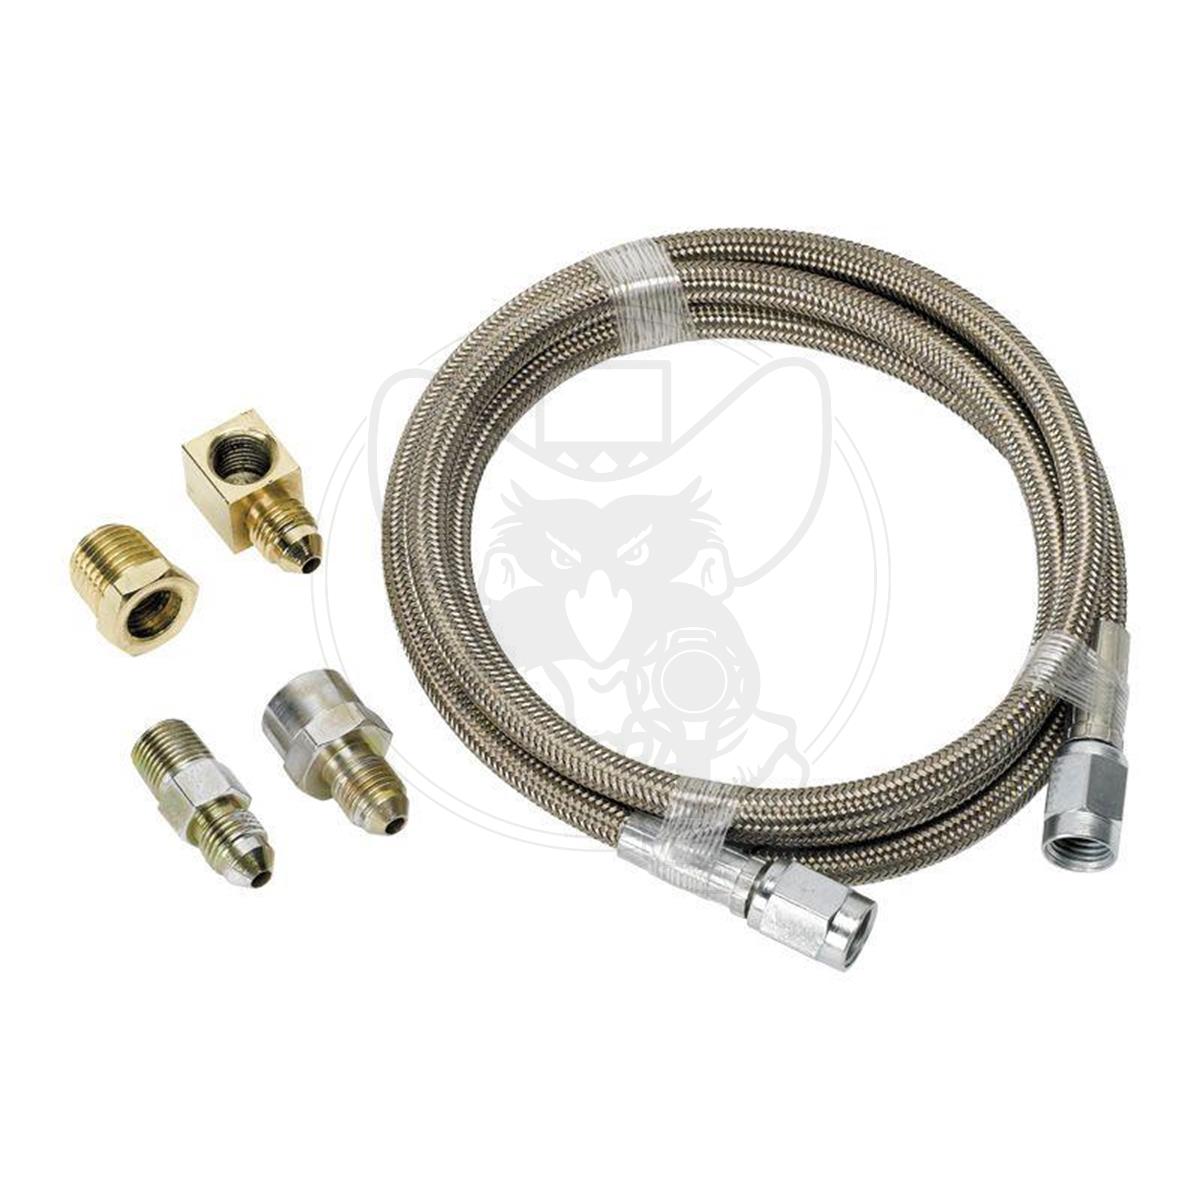 AF30-3006 - AEROFLOW -3AN X 6' BRAIDED STAINLESS STEEL LINE KIT